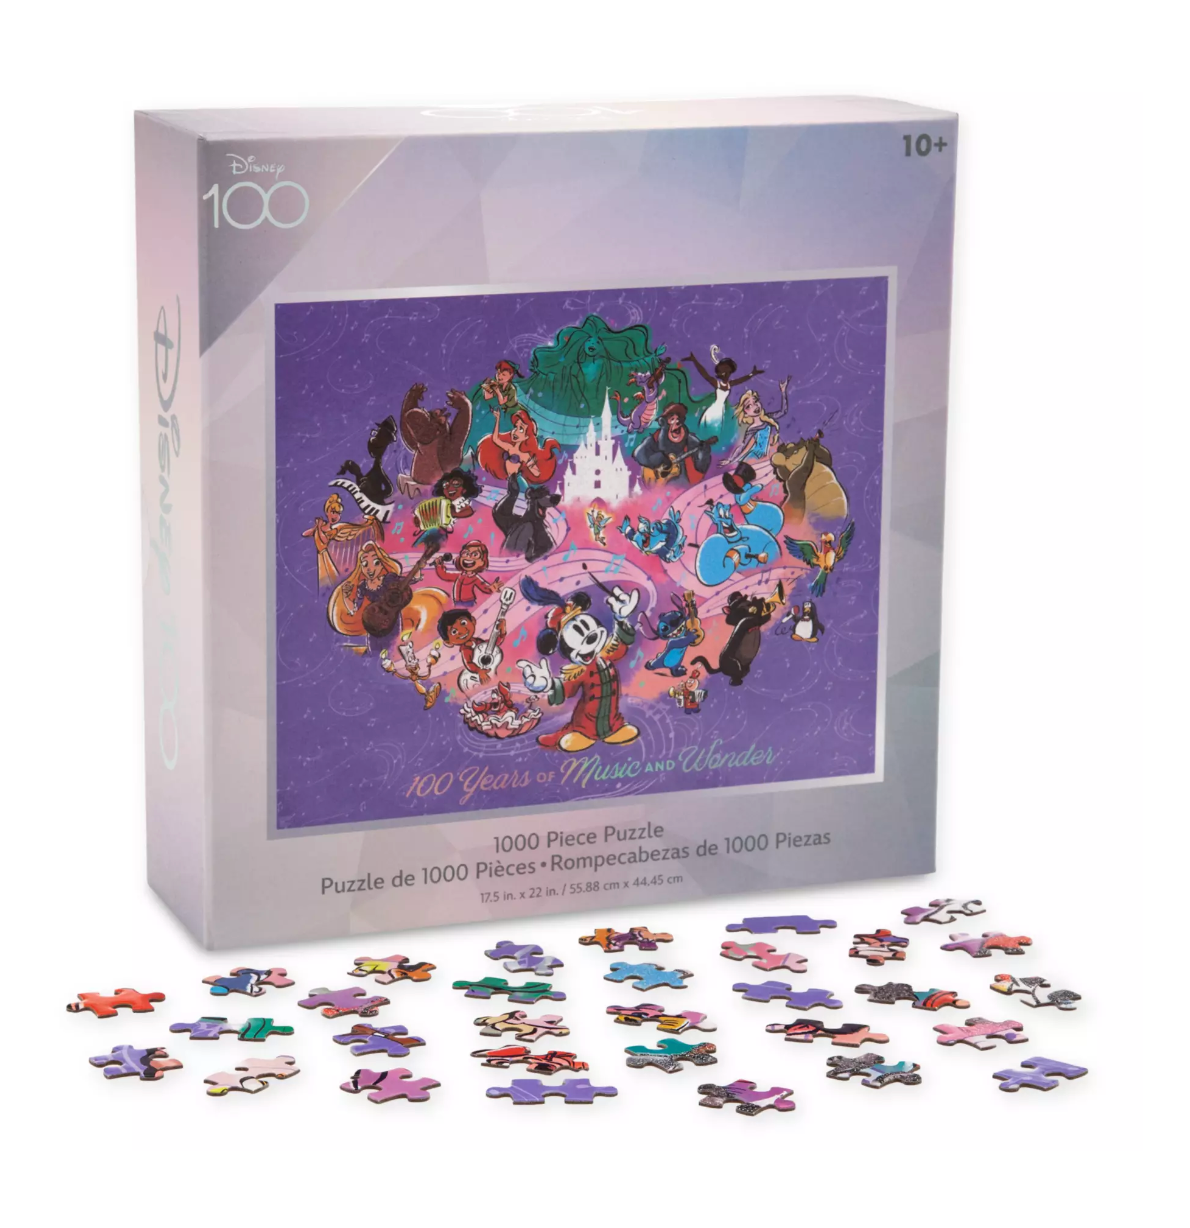 Disney Parks Mickey 100 Years of Music And Wonder Puzzle New with Tag